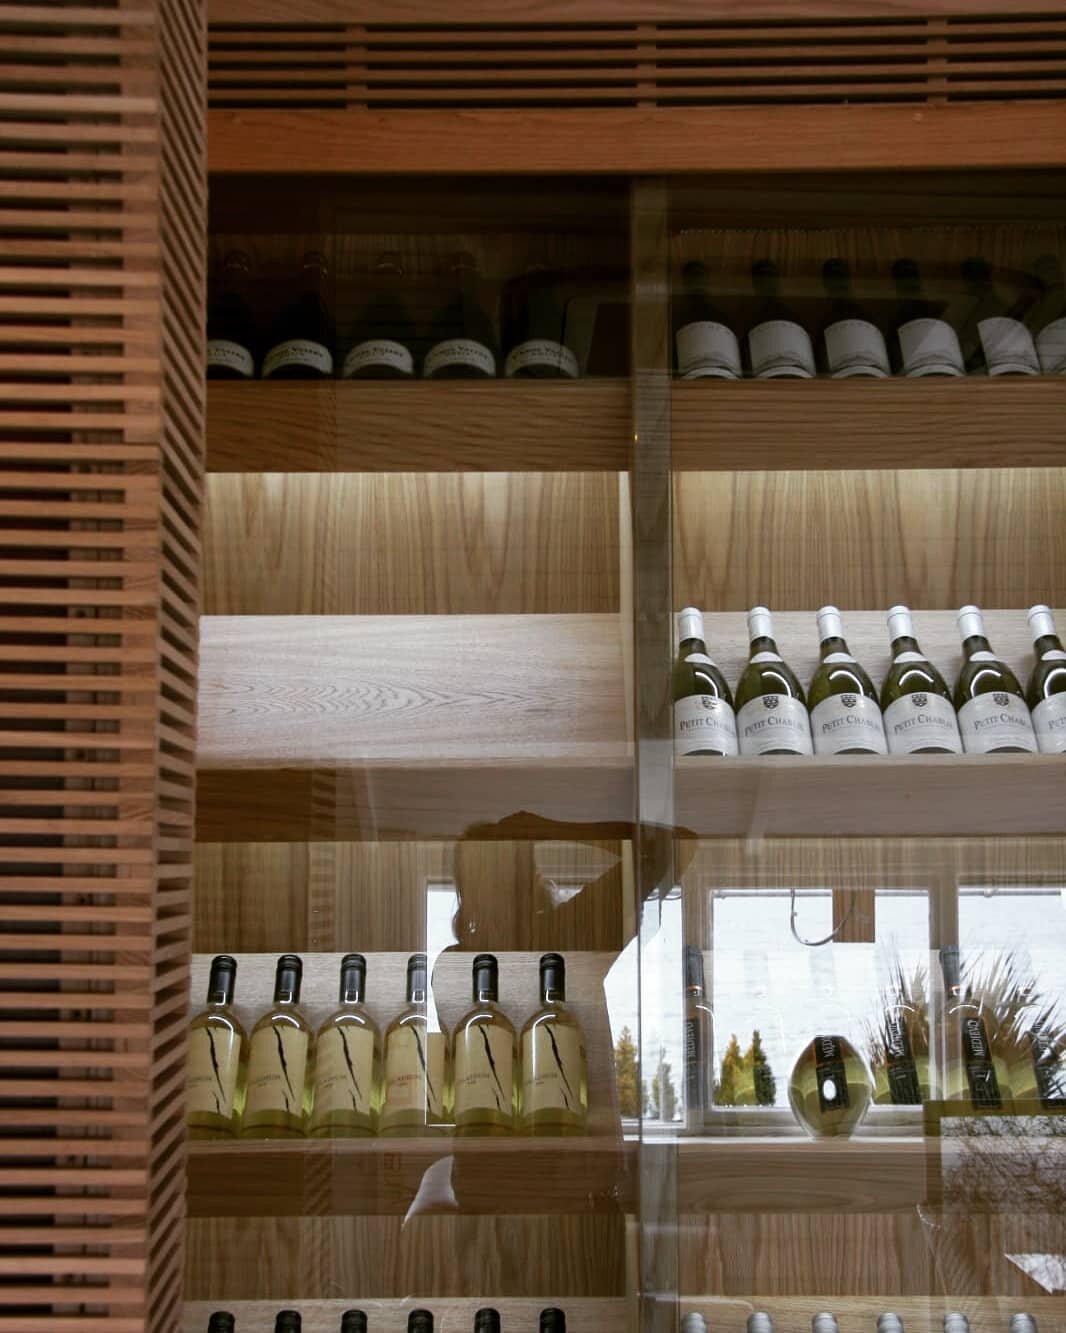 Throwback to a project Rachael completed 10 years ago @hookedontherocks. The joinery still looks good all these years on. This picture shows the beautiful bespoke oak wine display complete with lobster tank.